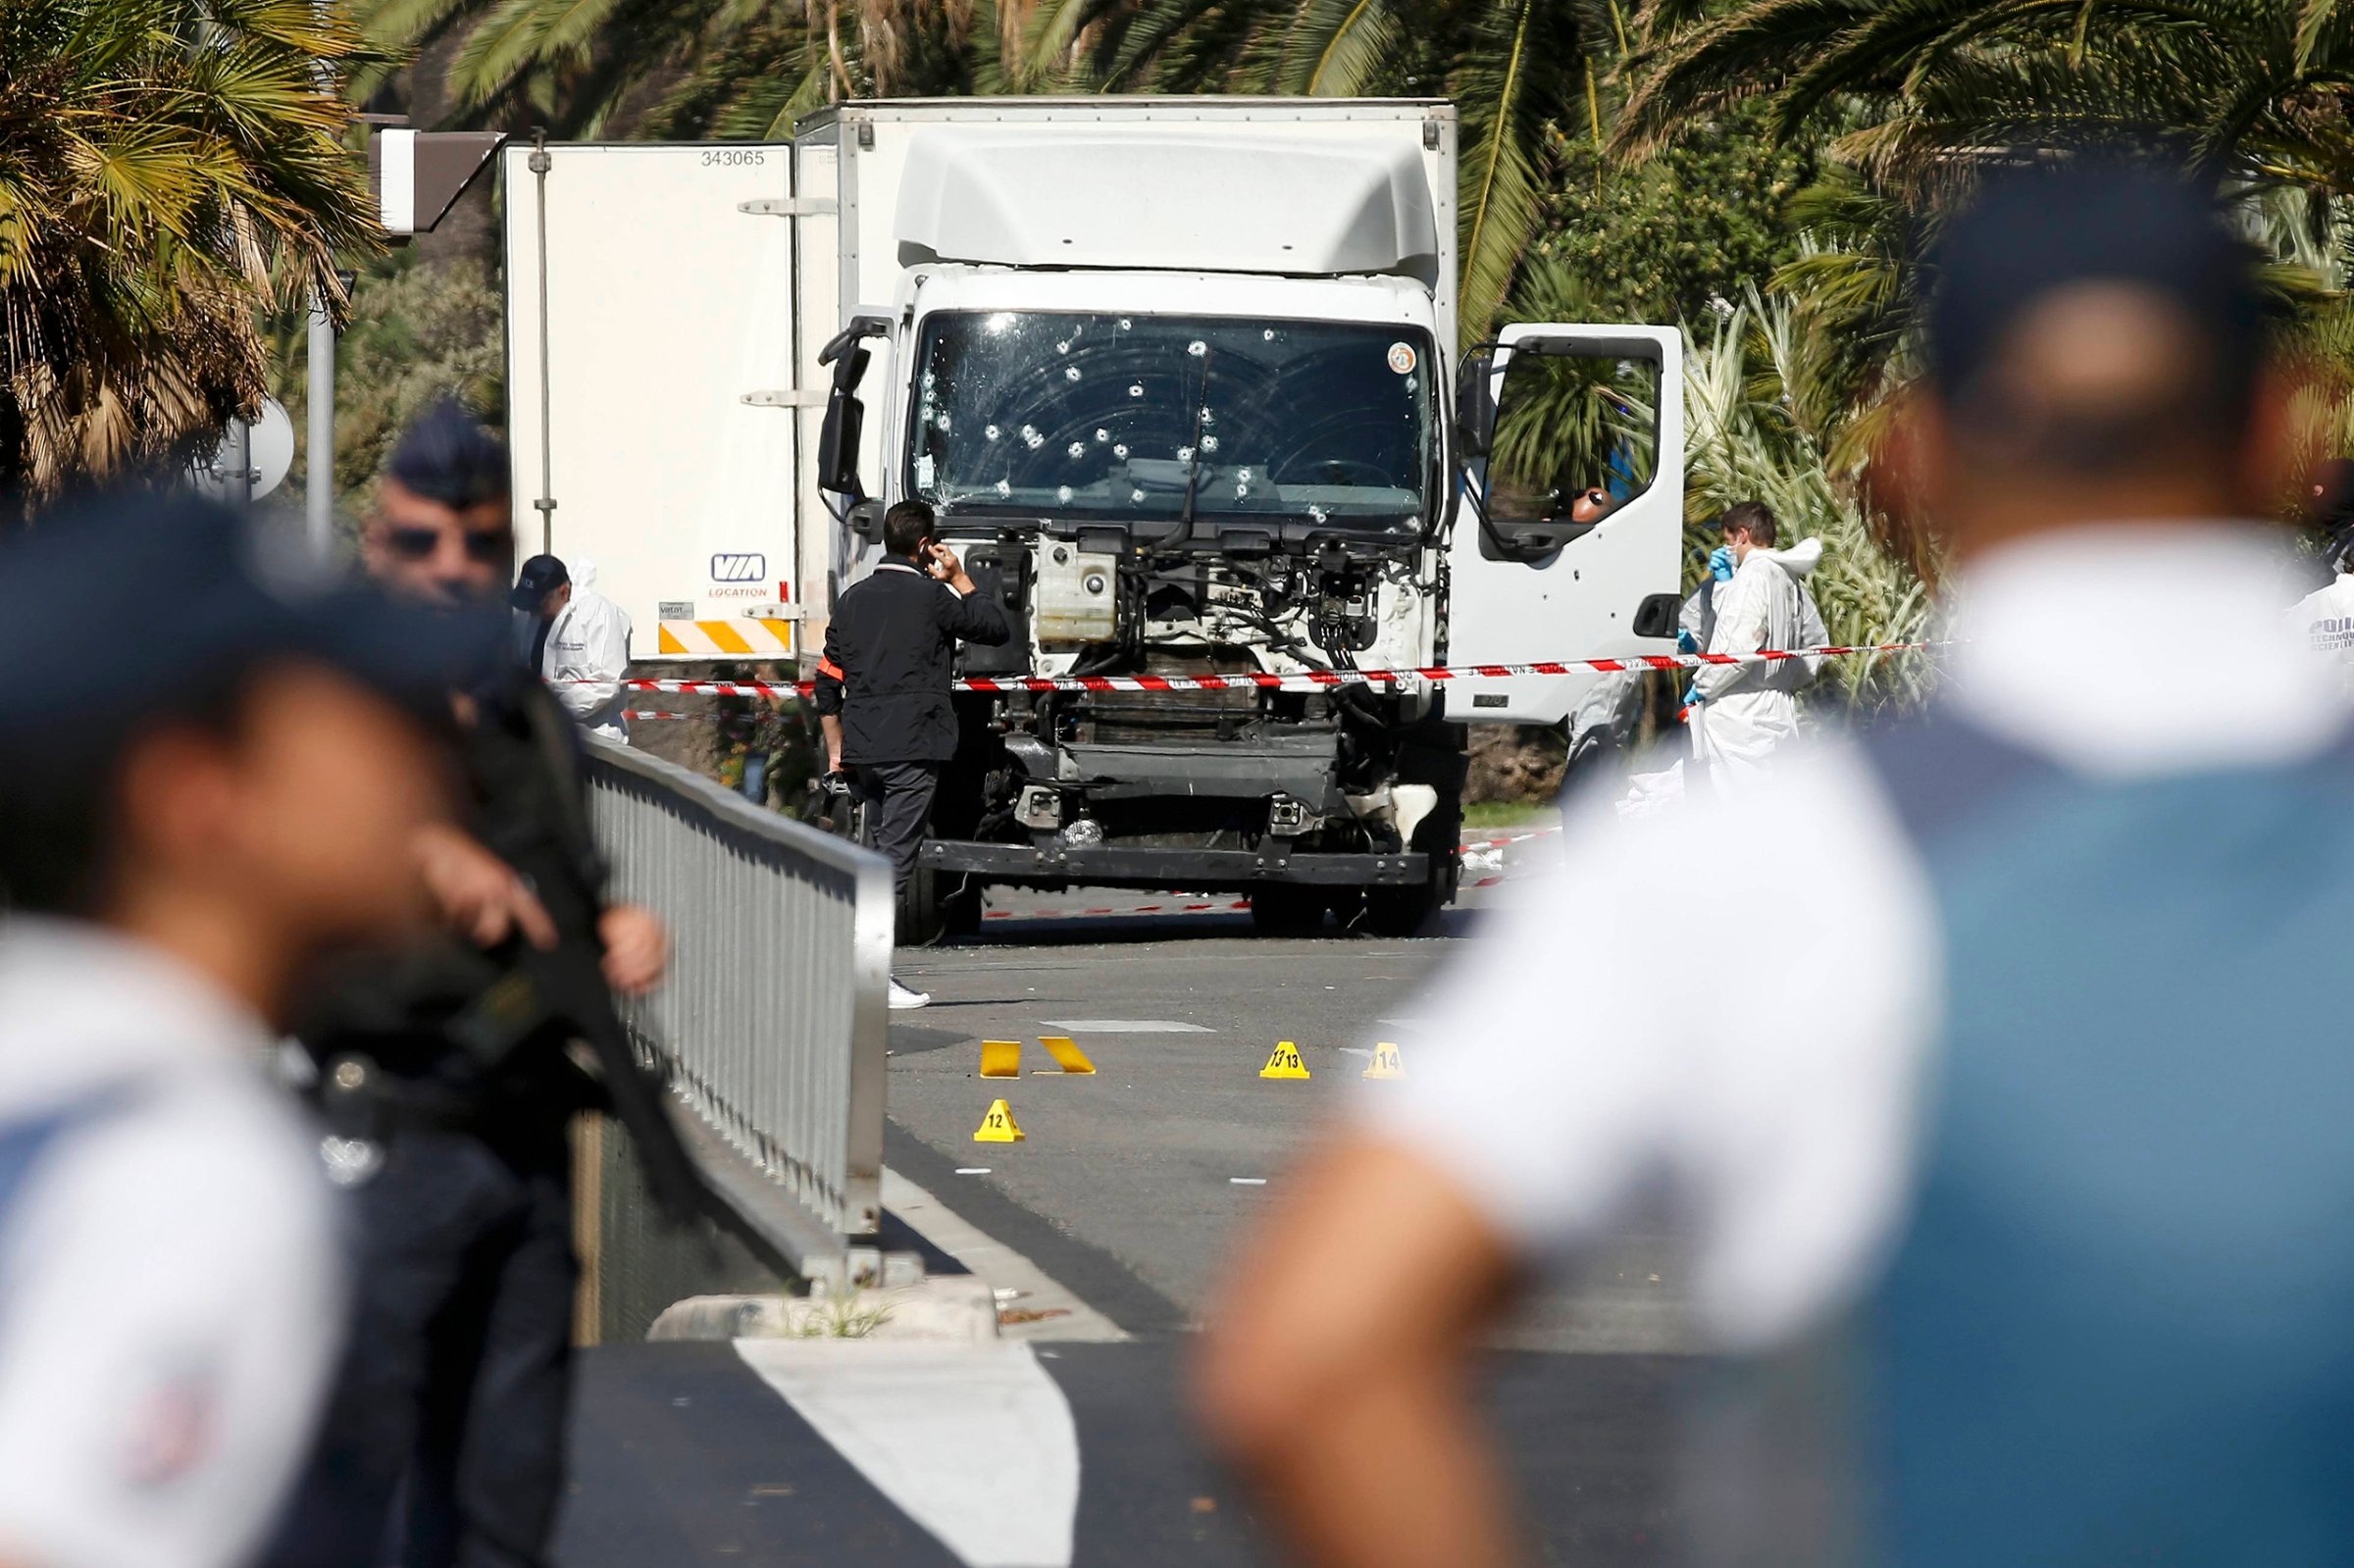 French police secure the area as the investigation continues at the scene near the truck that ran into a crowd at high speed, killing scores who were celebrating Bastille Day on July 14, on the Promenade des Anglais in Nice, France, on July 15, 2016.